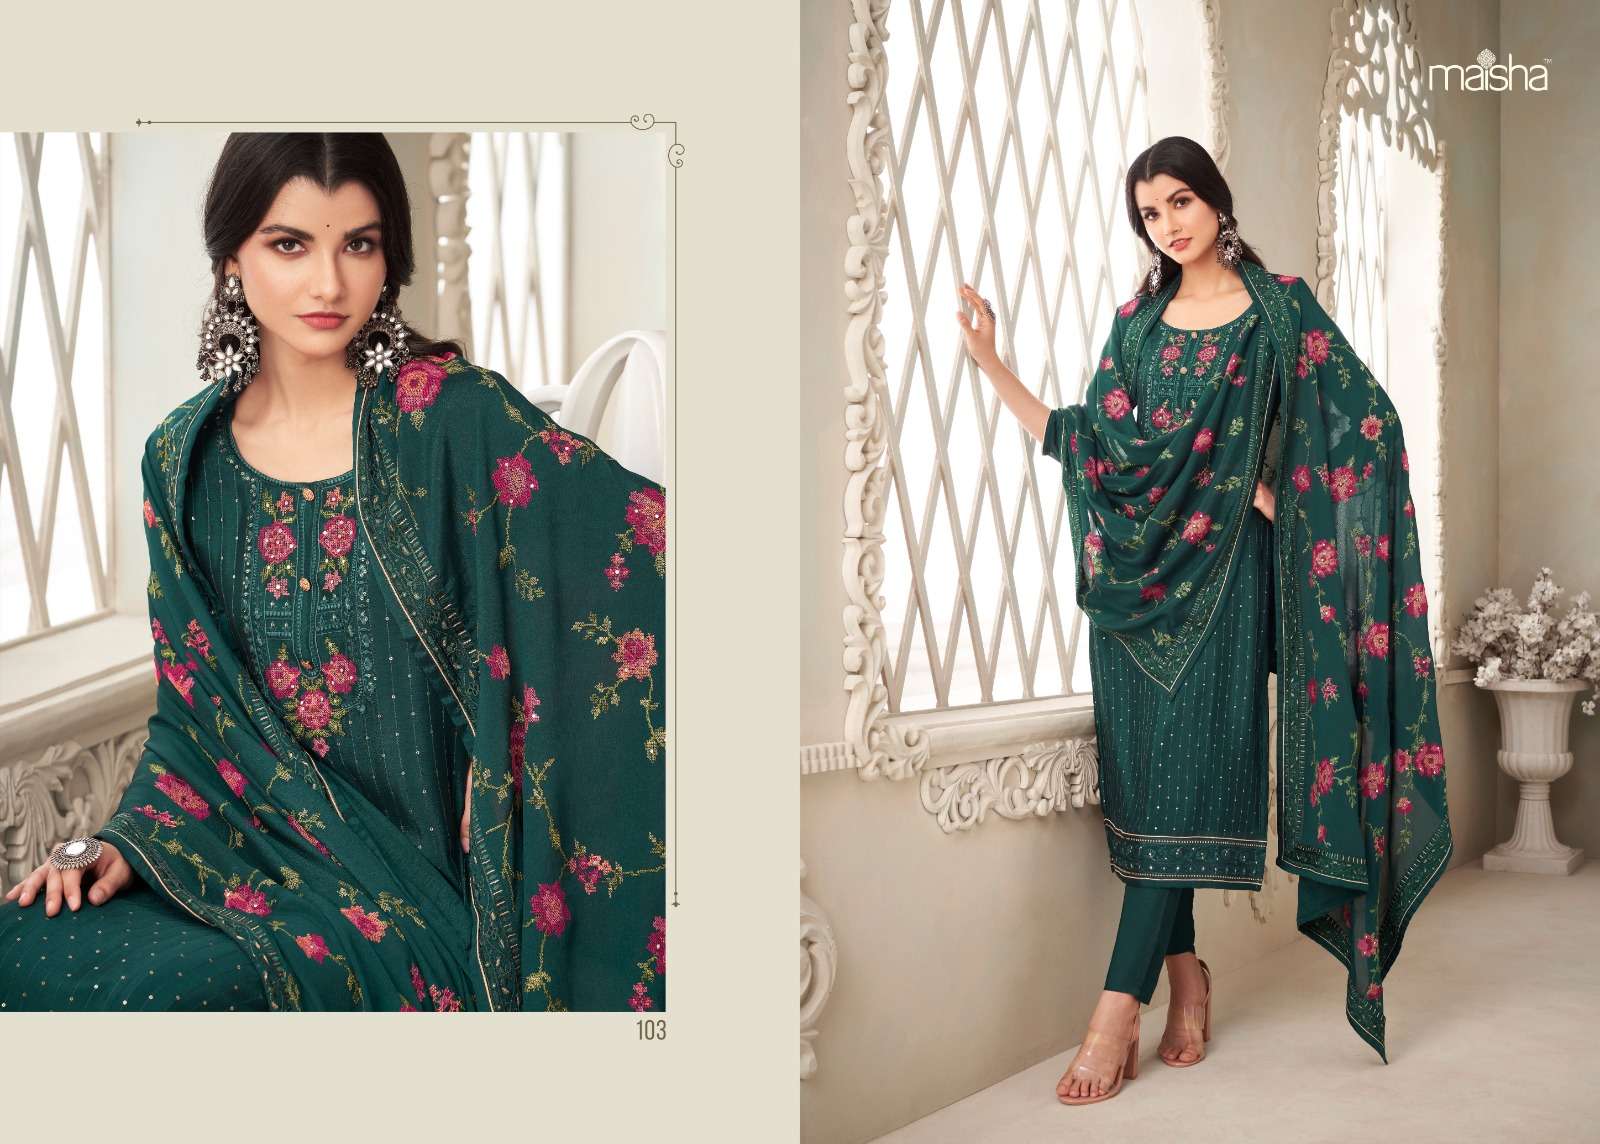 Pehnava By Maisha 101 To 106 Series Designer Festive Suits Collection Beautiful Stylish Colorful Fancy Party Wear & Occasional Wear Pure Chiffon Dresses At Wholesale Price